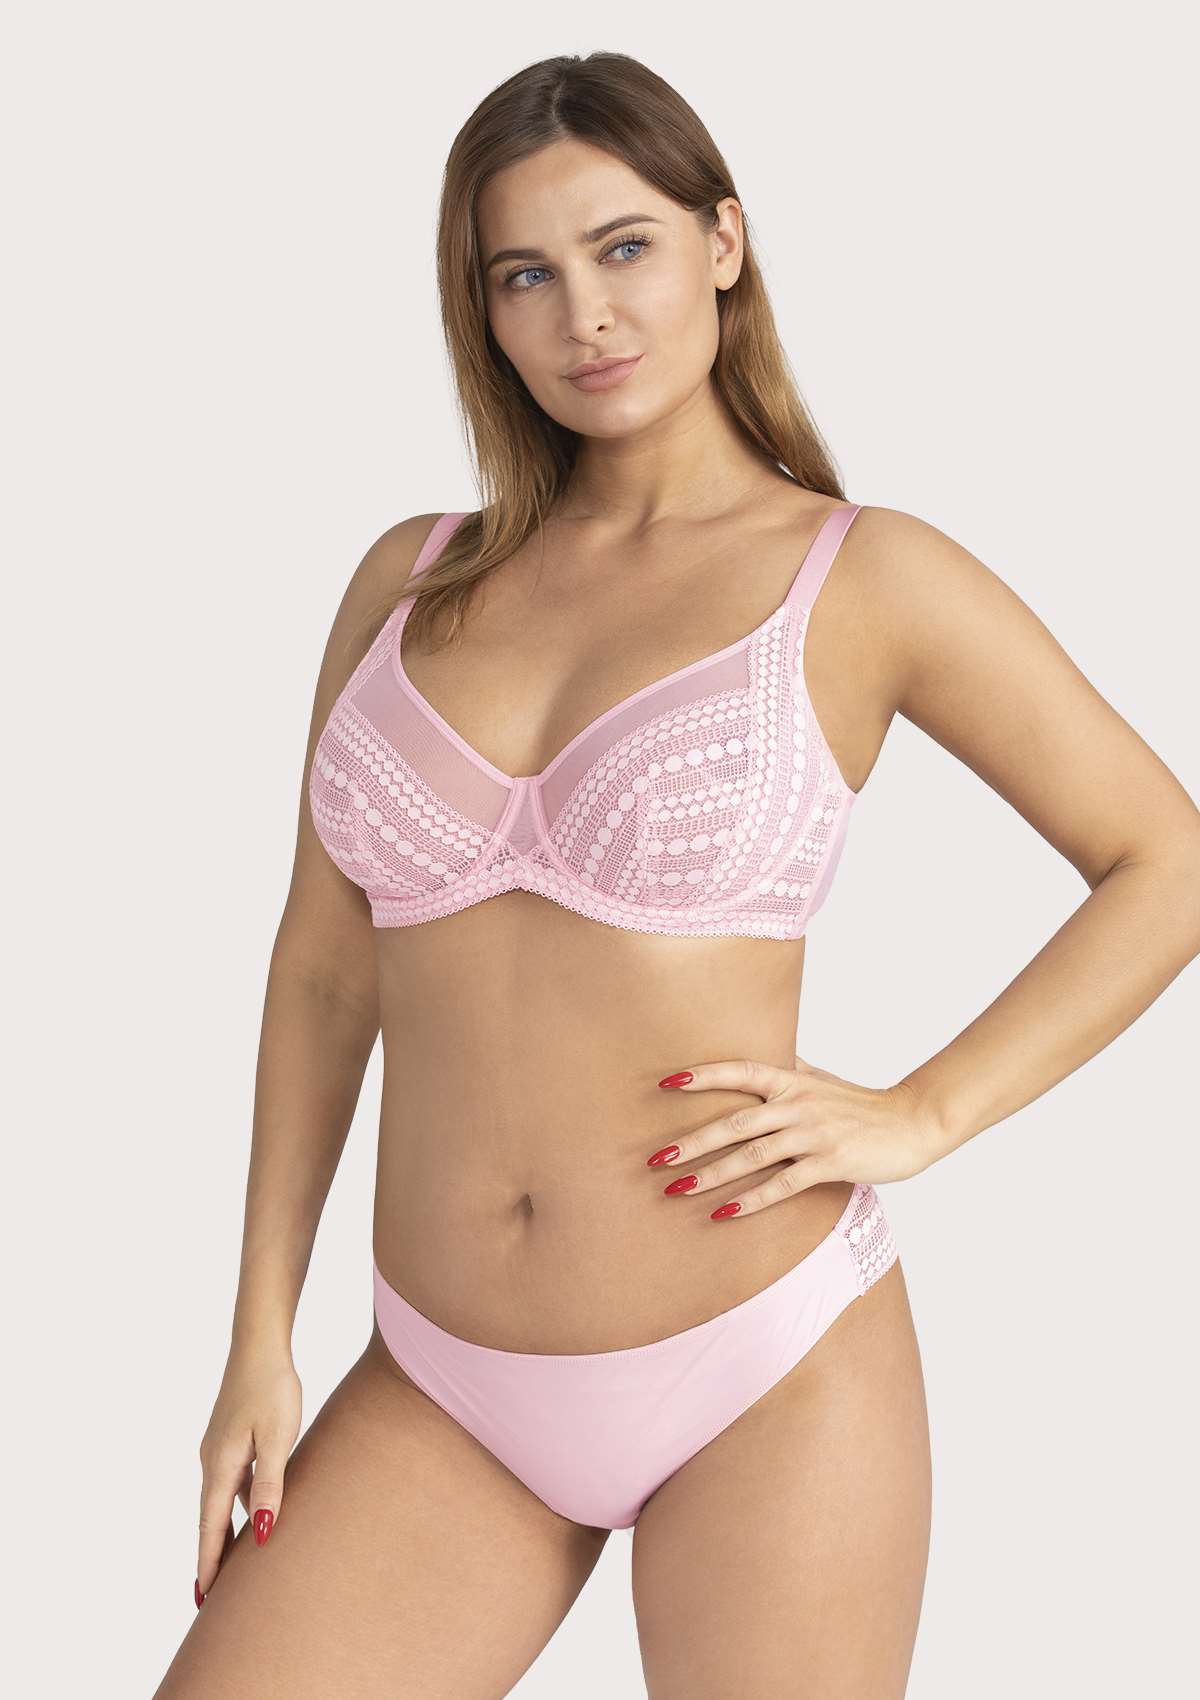 HSIA Heroine Lace Bra And Panties Set: Most Comfortable Supportive Bra - Pink / 42 / DDD/F